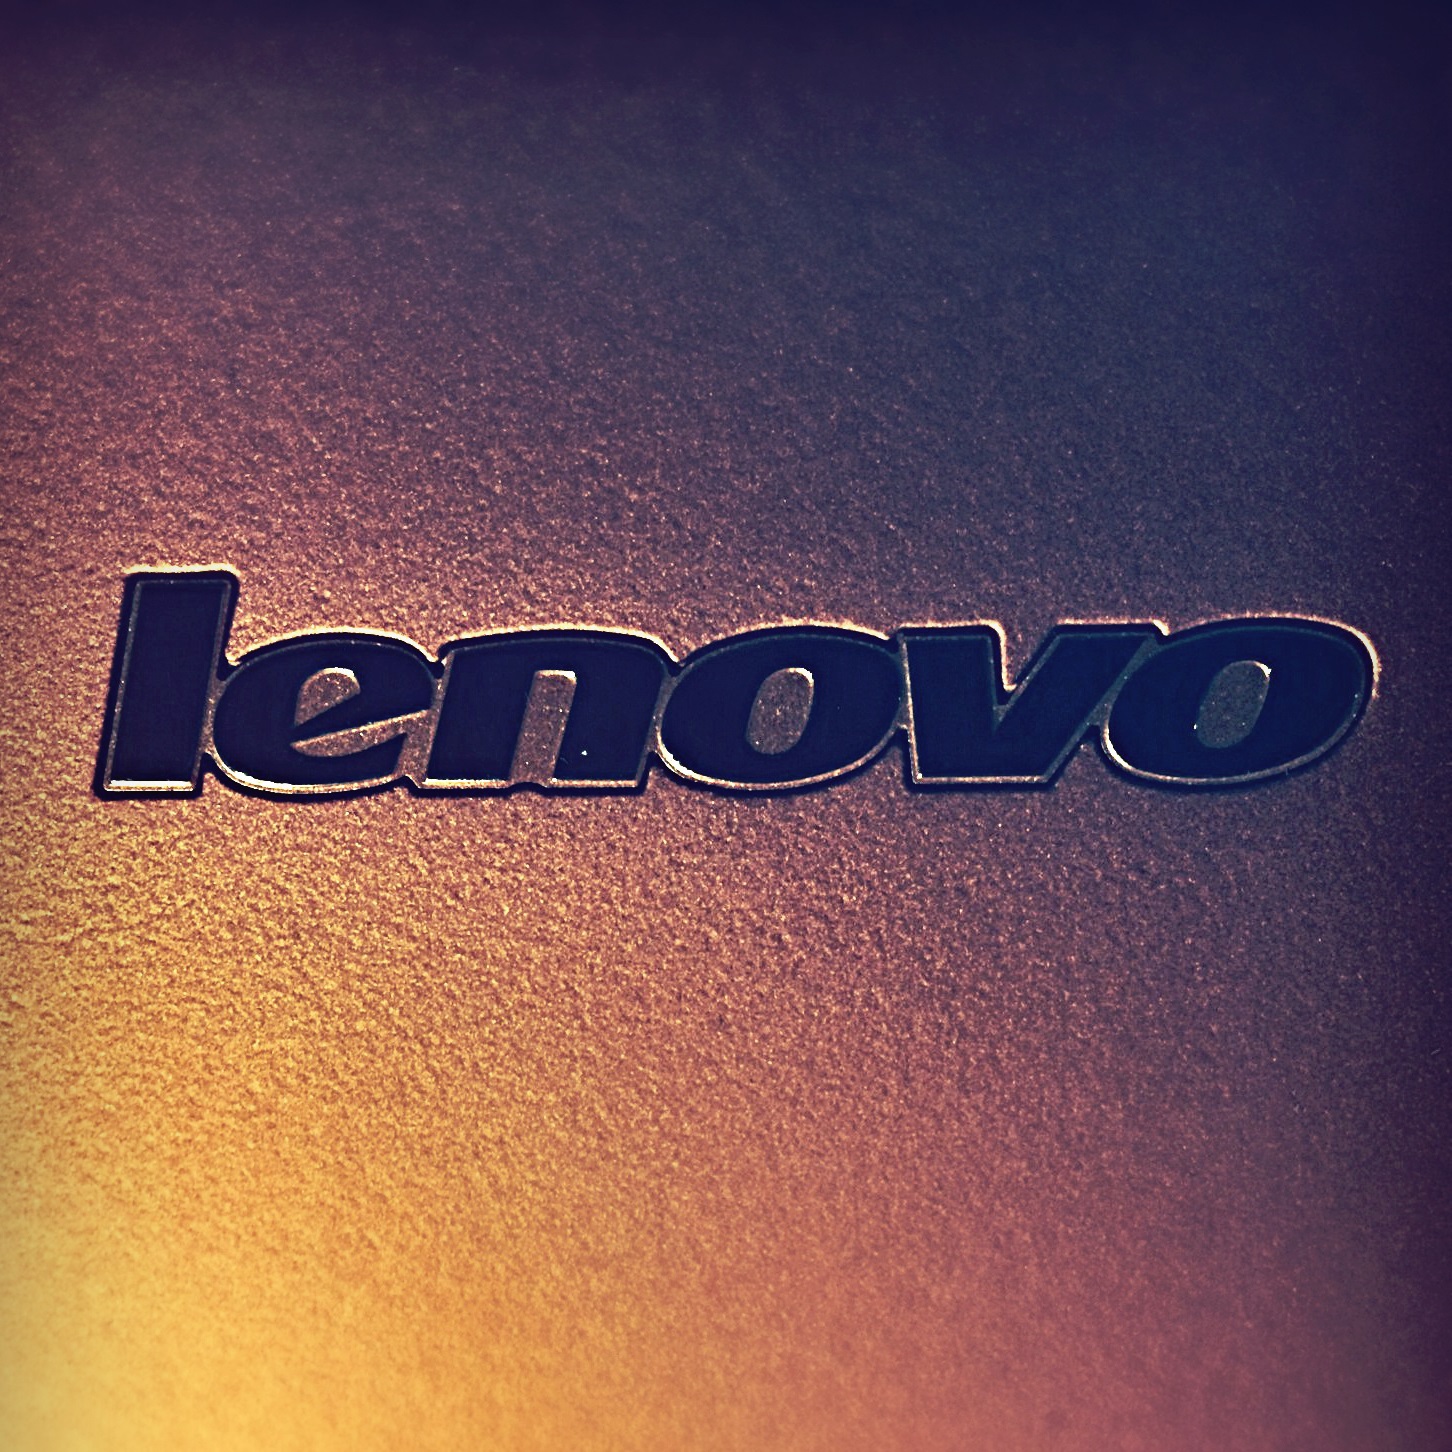 Lenovo To Pay $70m In IdeaPad Wi-Fi Settlement